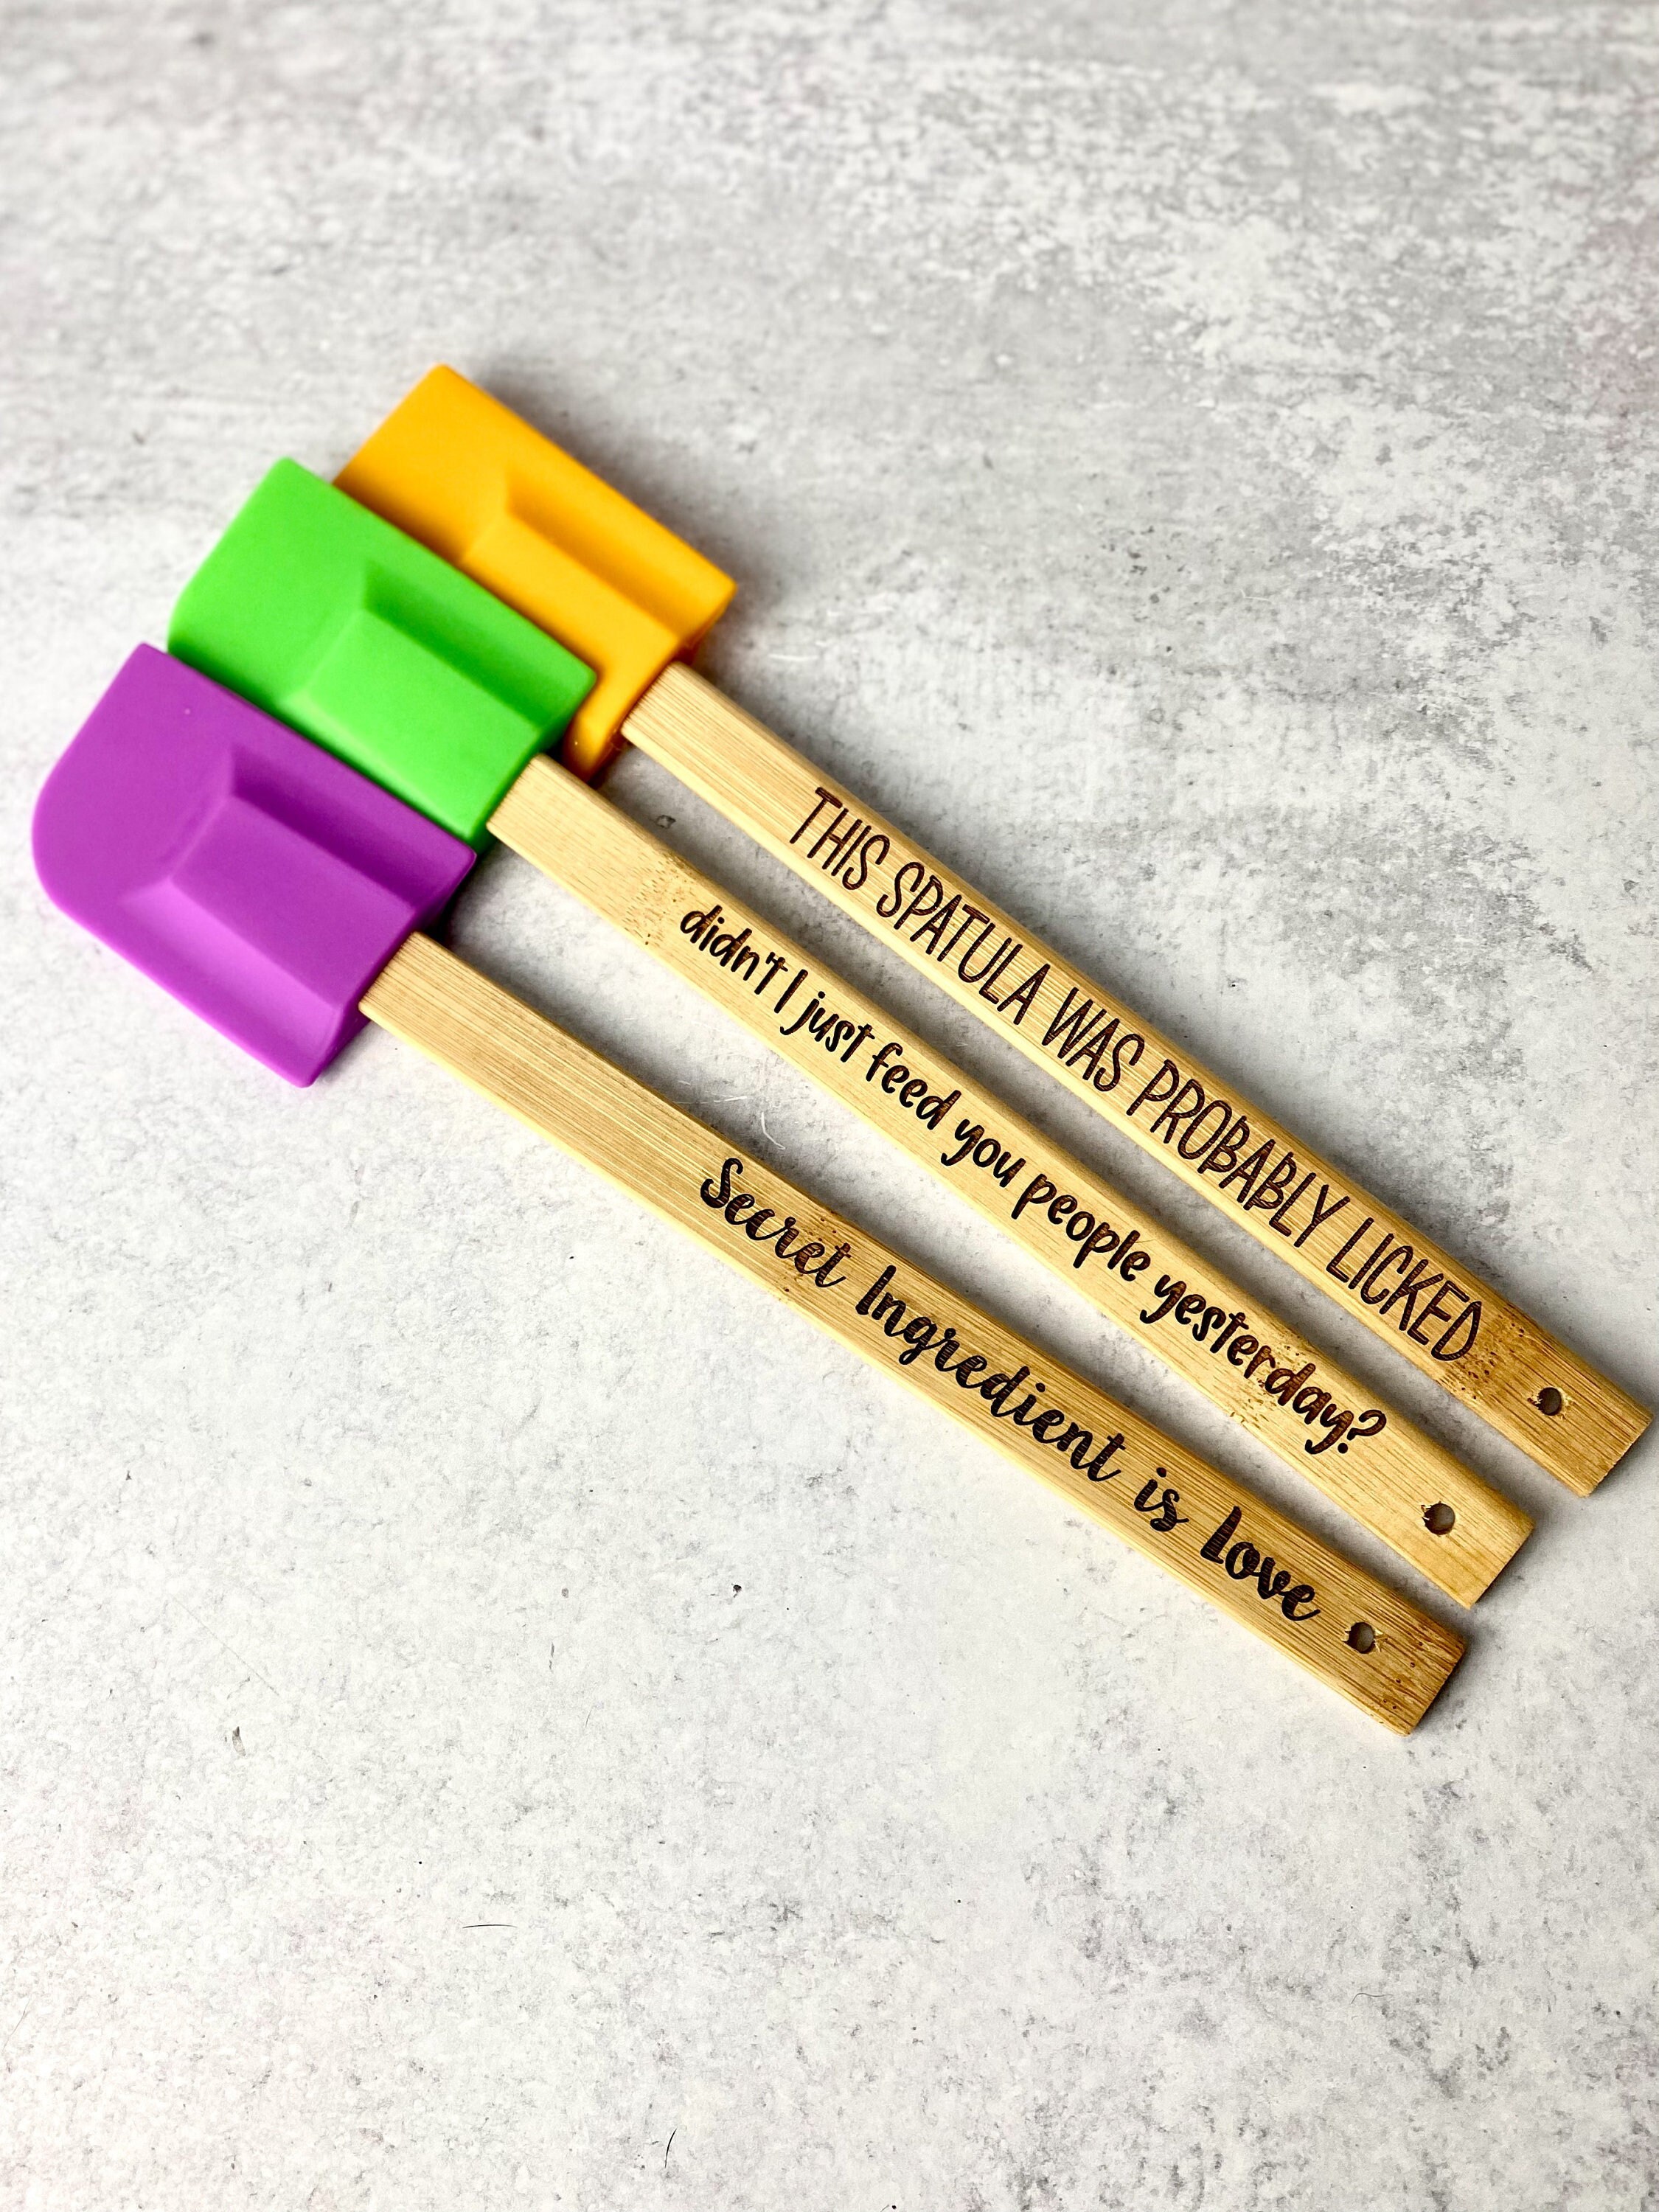 Silicone Spatula with Funny Saying - Multiple Options - Linabella